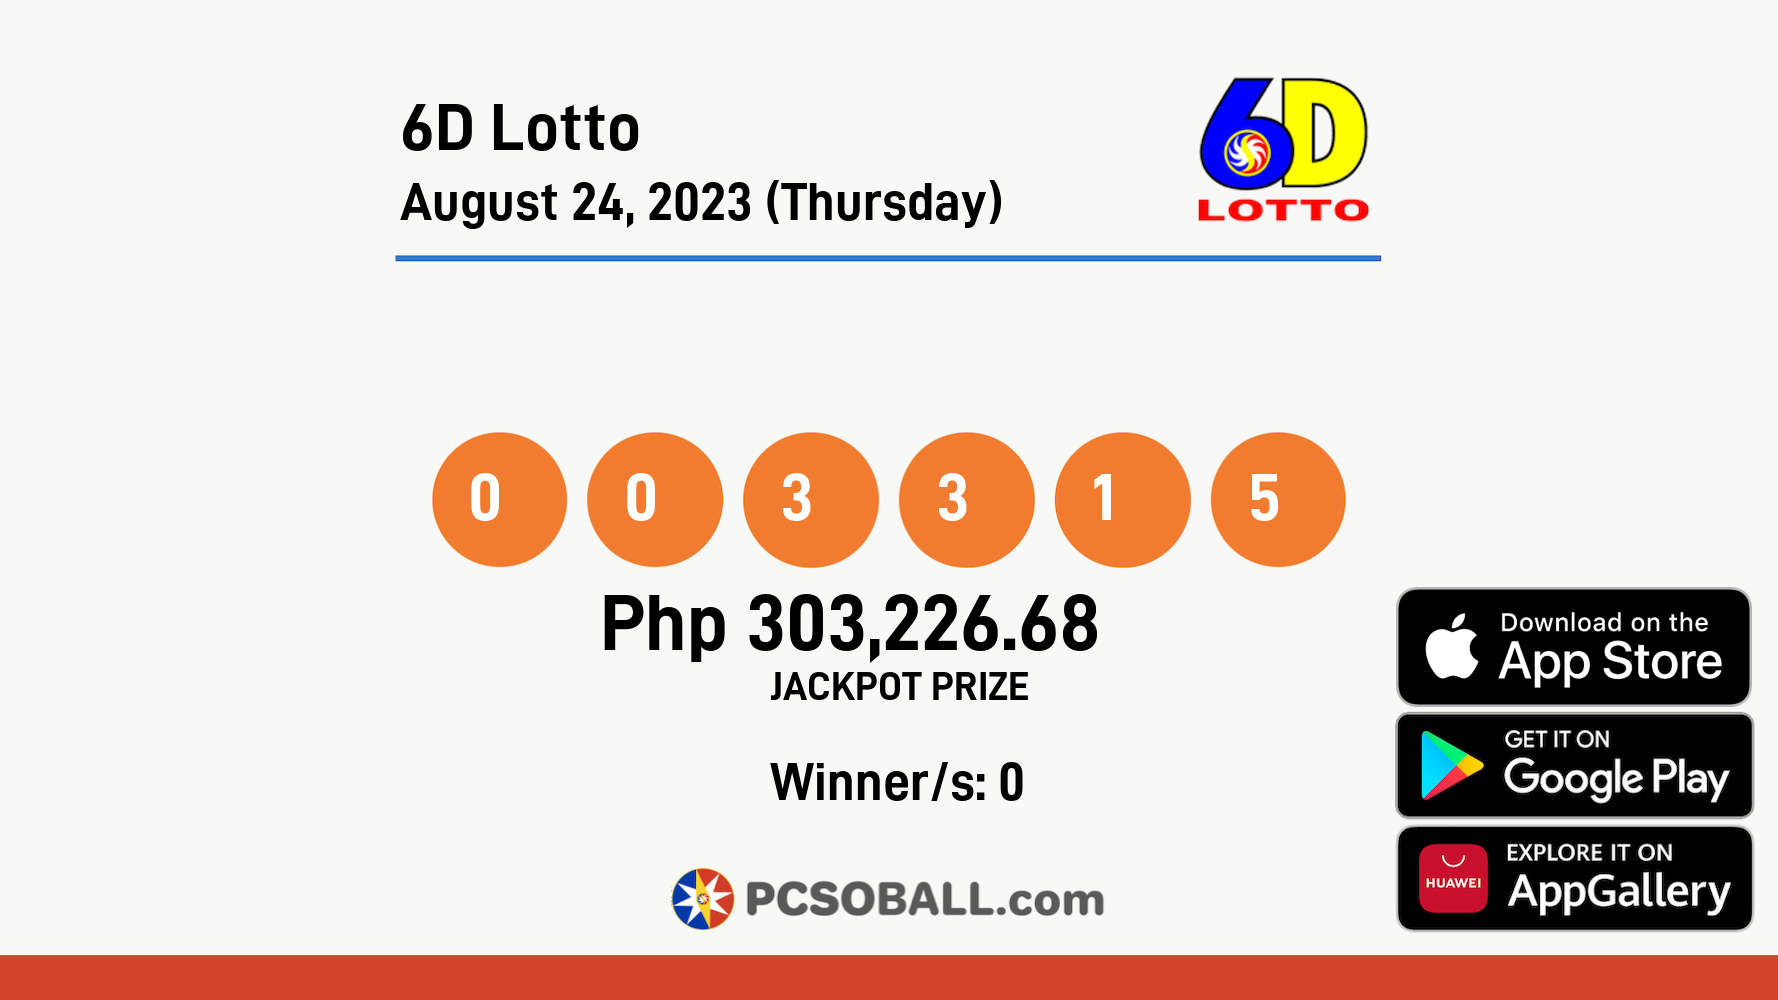 6D Lotto August 24, 2023 (Thursday) Result